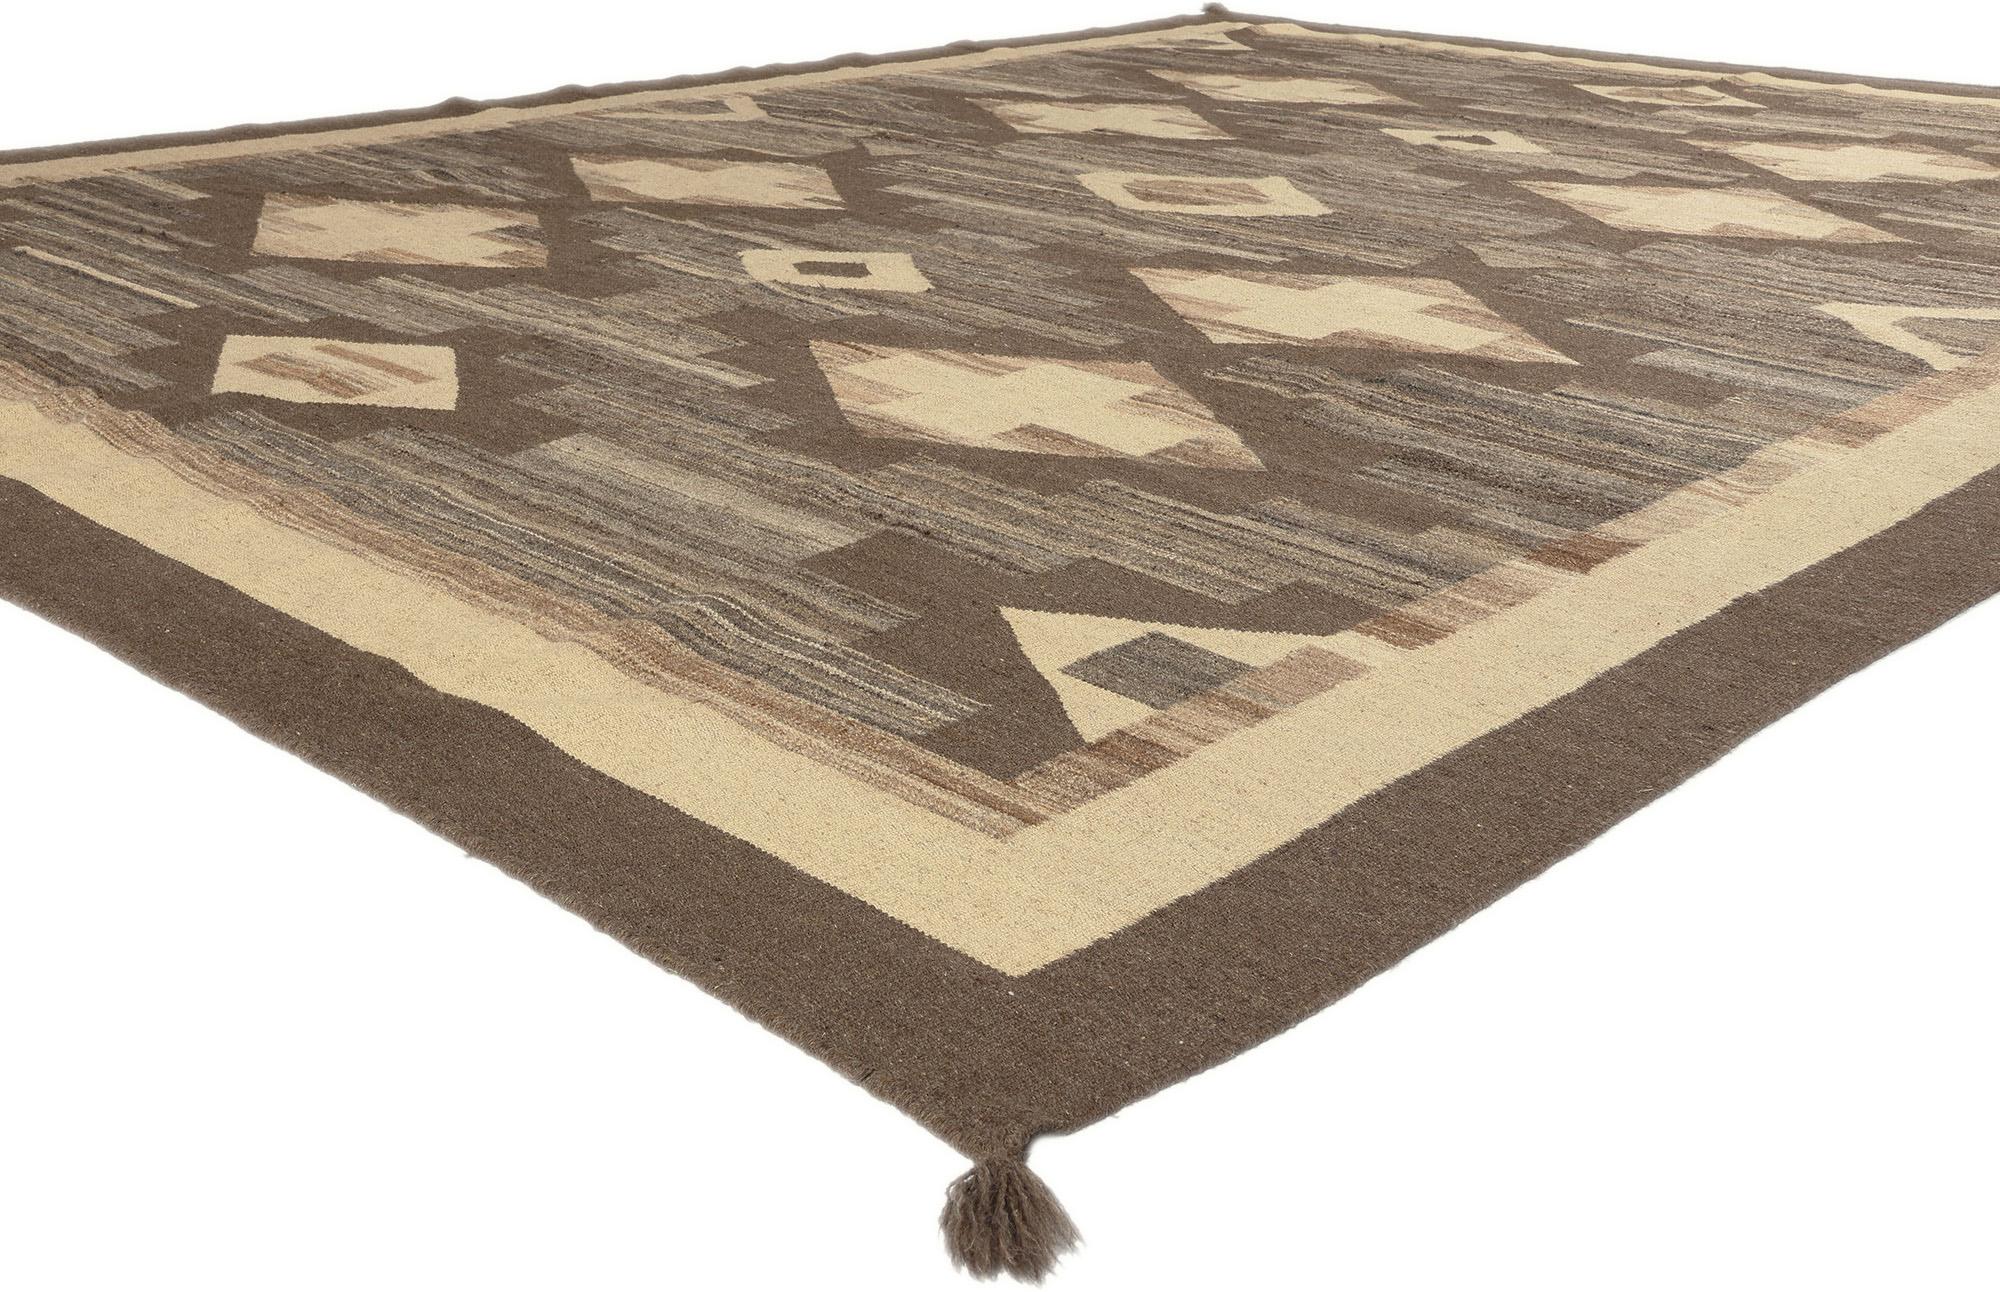 81034 Southwest Modern Ganado Navajo-Style Rug, 09'02 x 12'00. Immerse nearly any space in the allure of Southwest Modern aesthetics with this Southwest Modern Ganado Navajo-style rug. A handwoven masterpiece influenced by the spirit of Contemporary